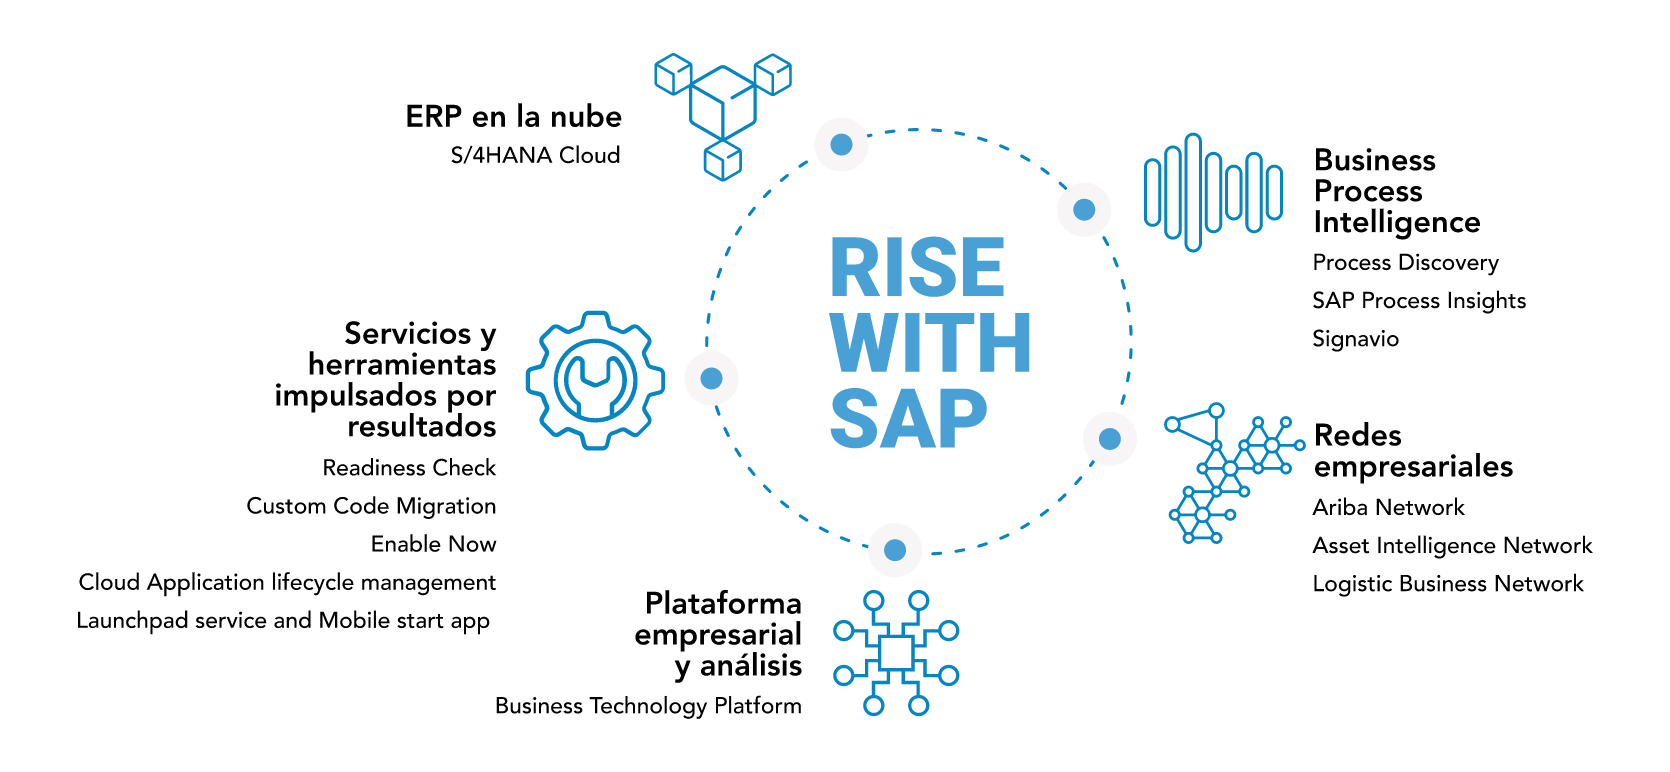 RISEWITHSAP